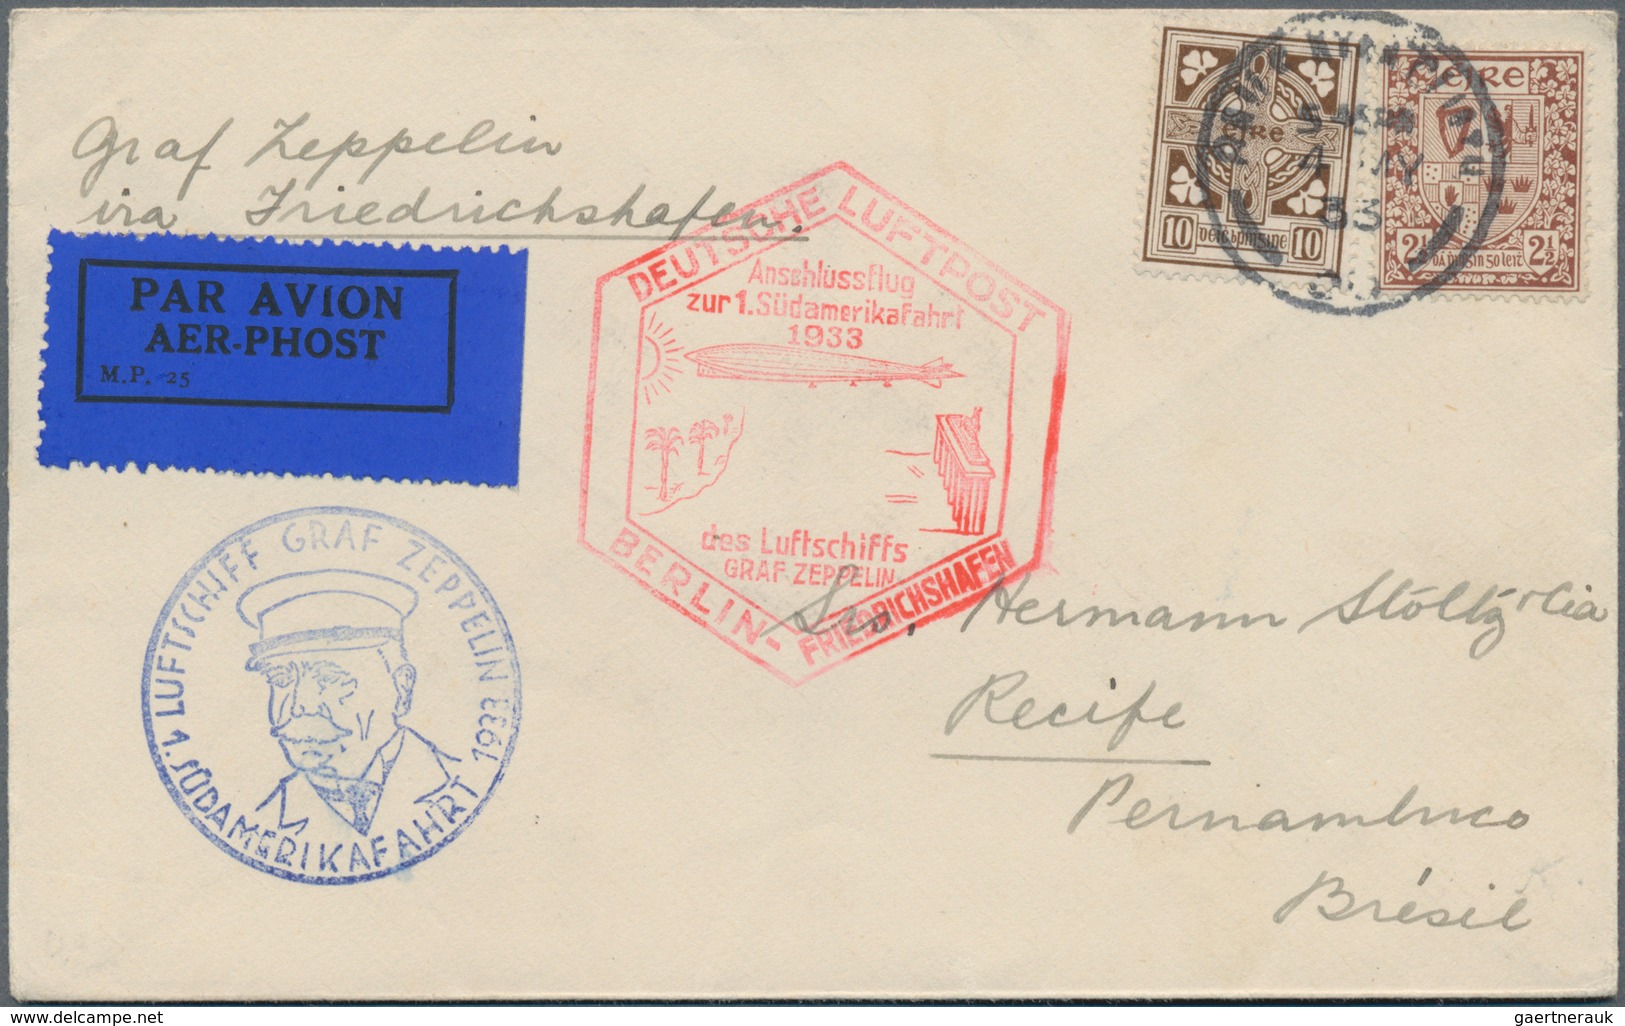 Irland: 1933, 1st SOUTH AMERICA FLIGHT, Contract State Envelope From DUBLIN With Connecting Flight " - Covers & Documents